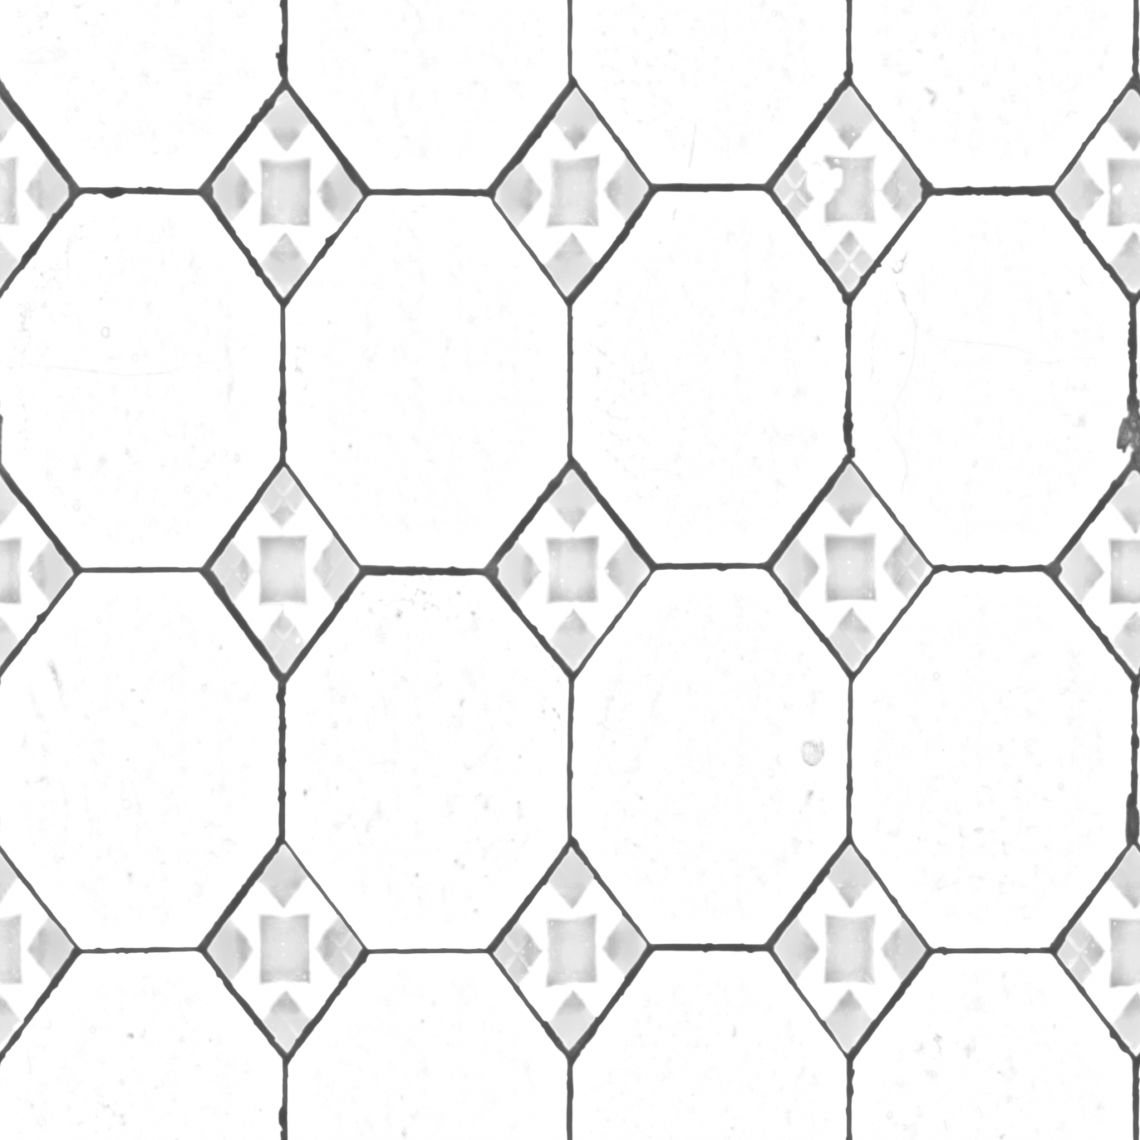 Ornate-Tiles-02-Ambient-Occlusion - Seamless